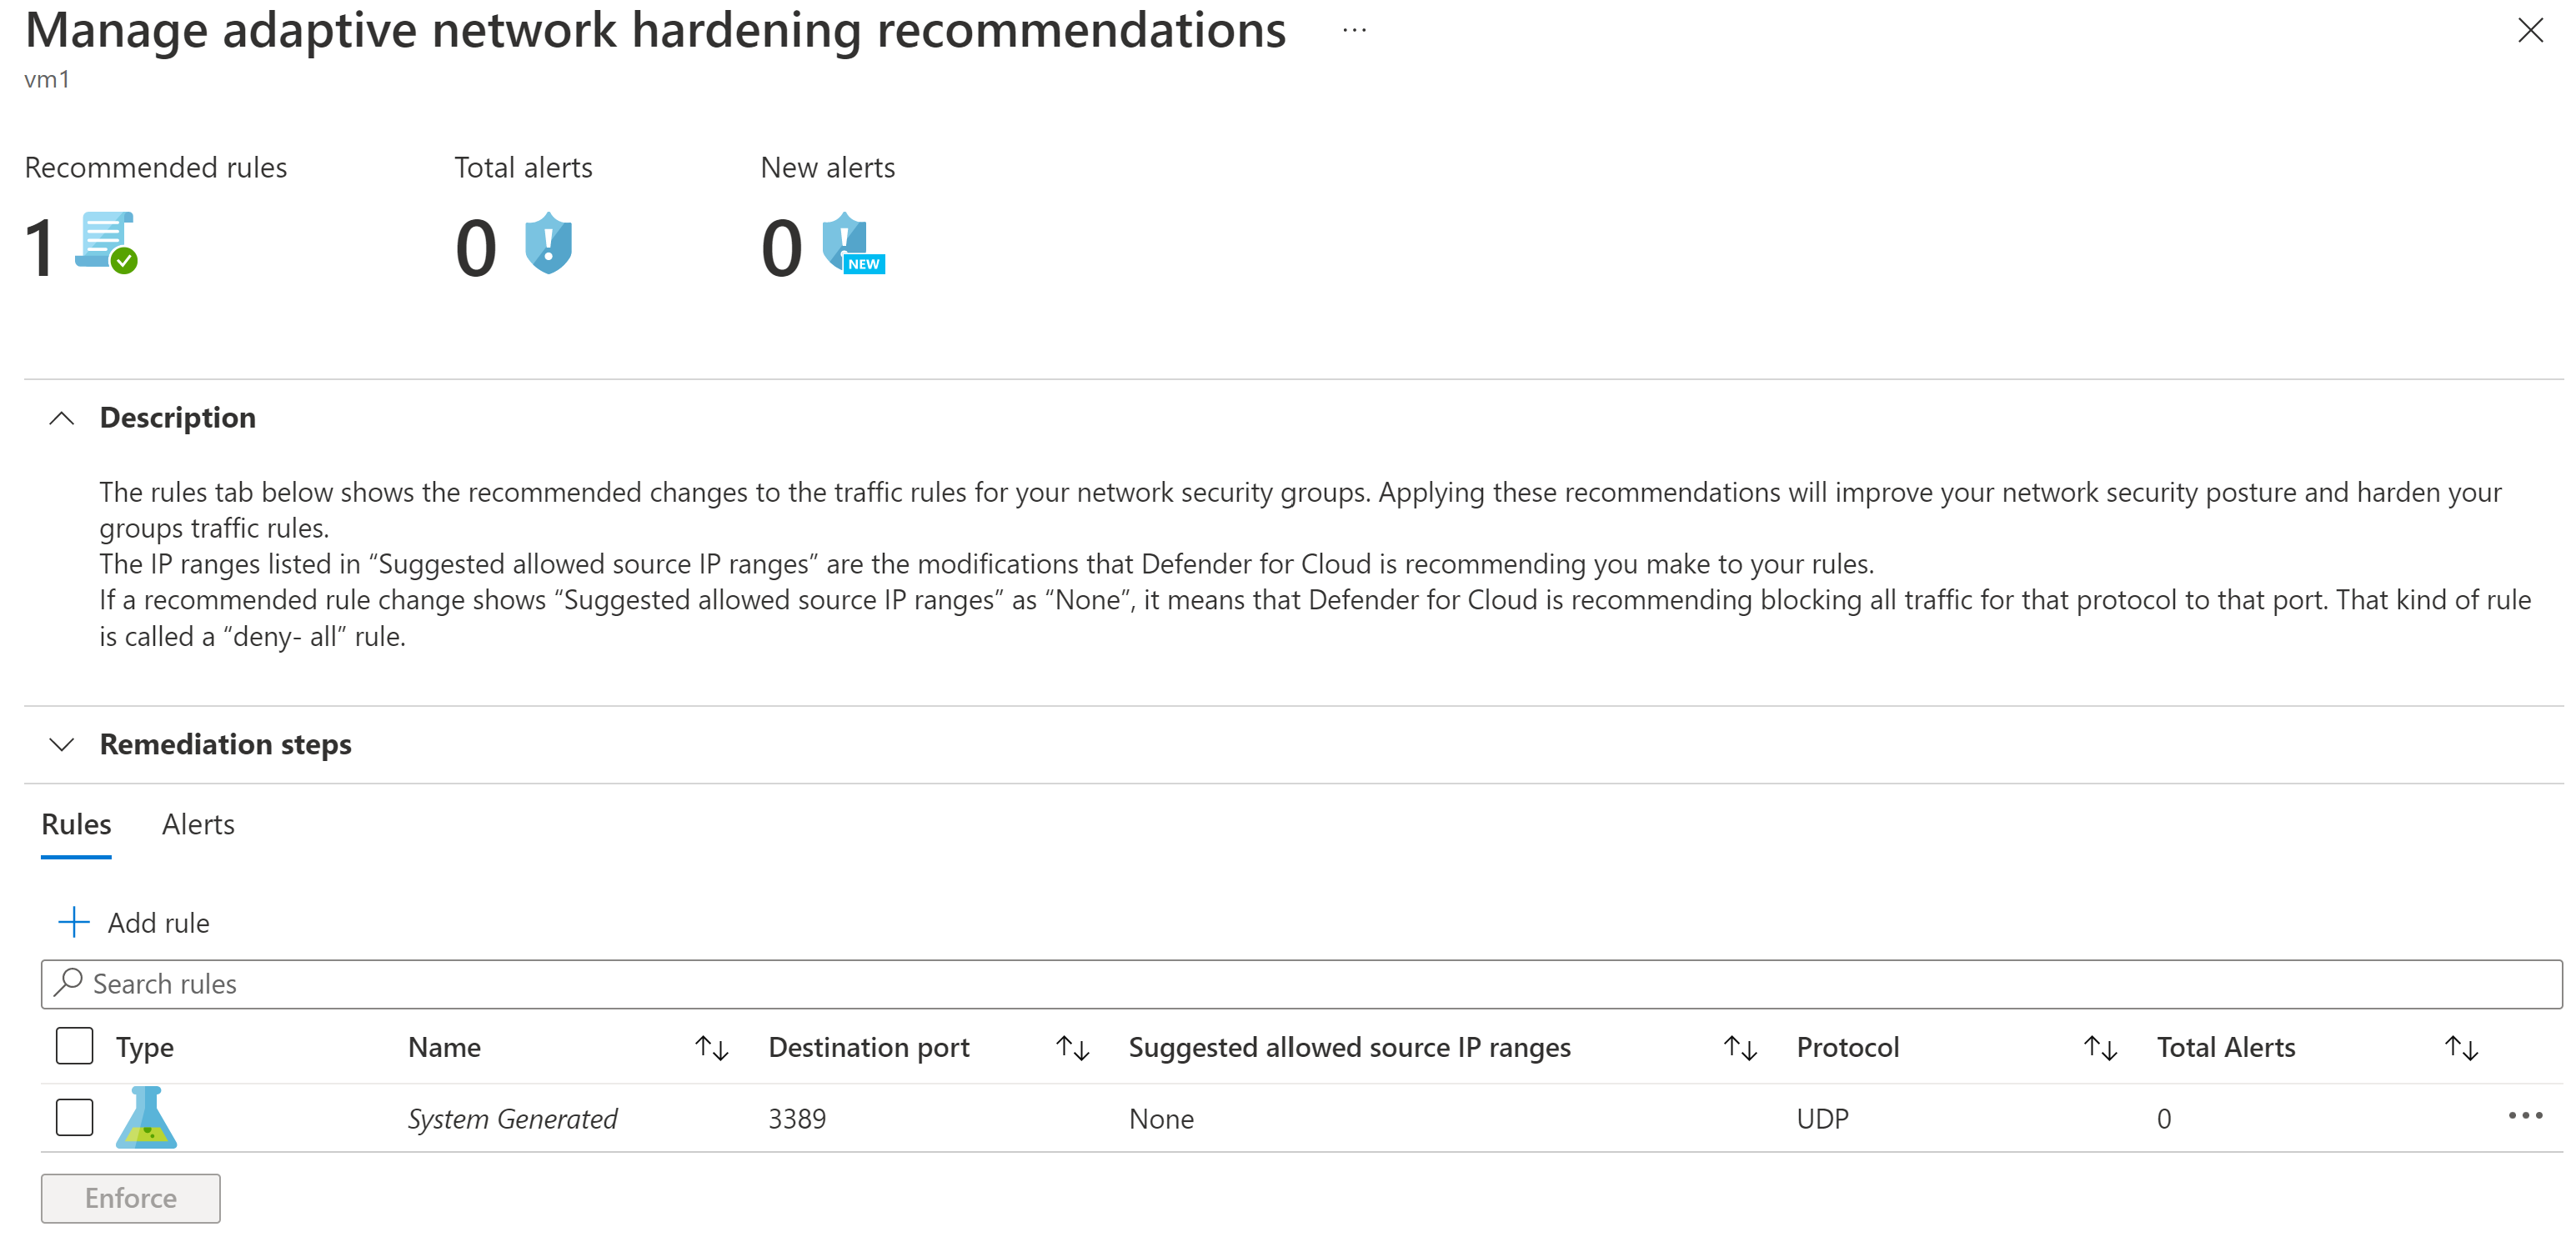 Screenshot example of network hardening recommendations.